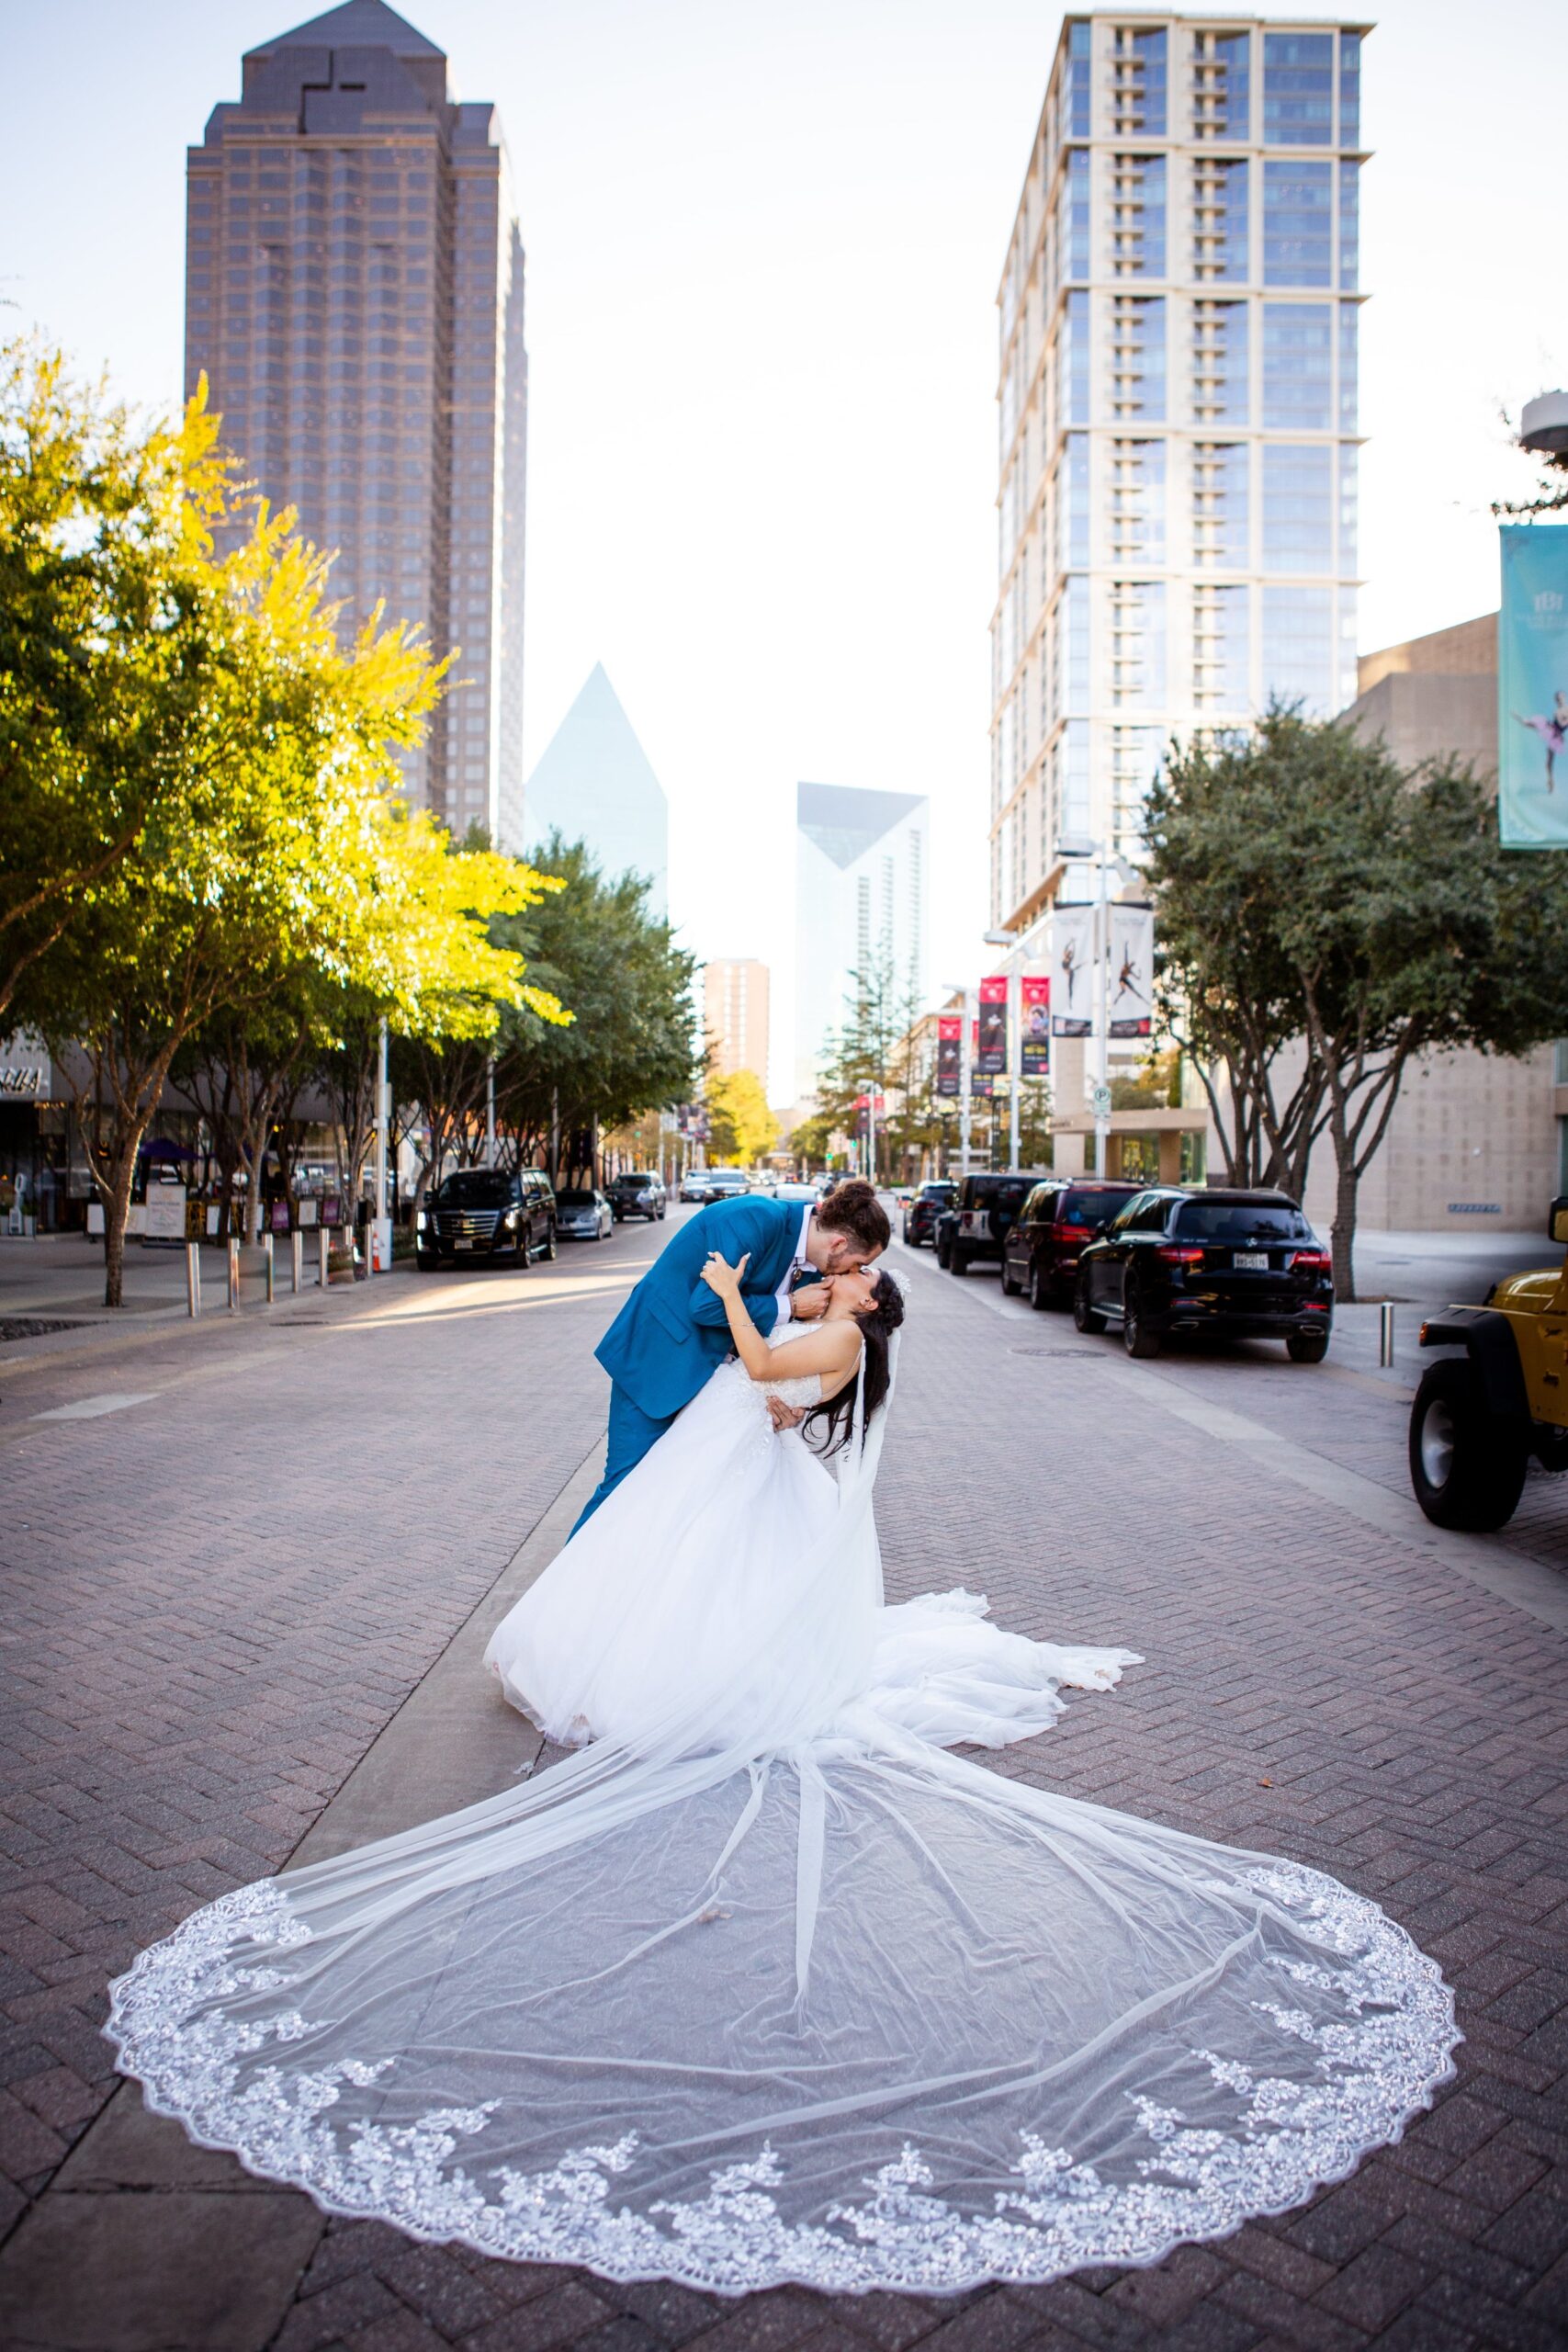 Bride and groom's special moment captured in downtown Dallas